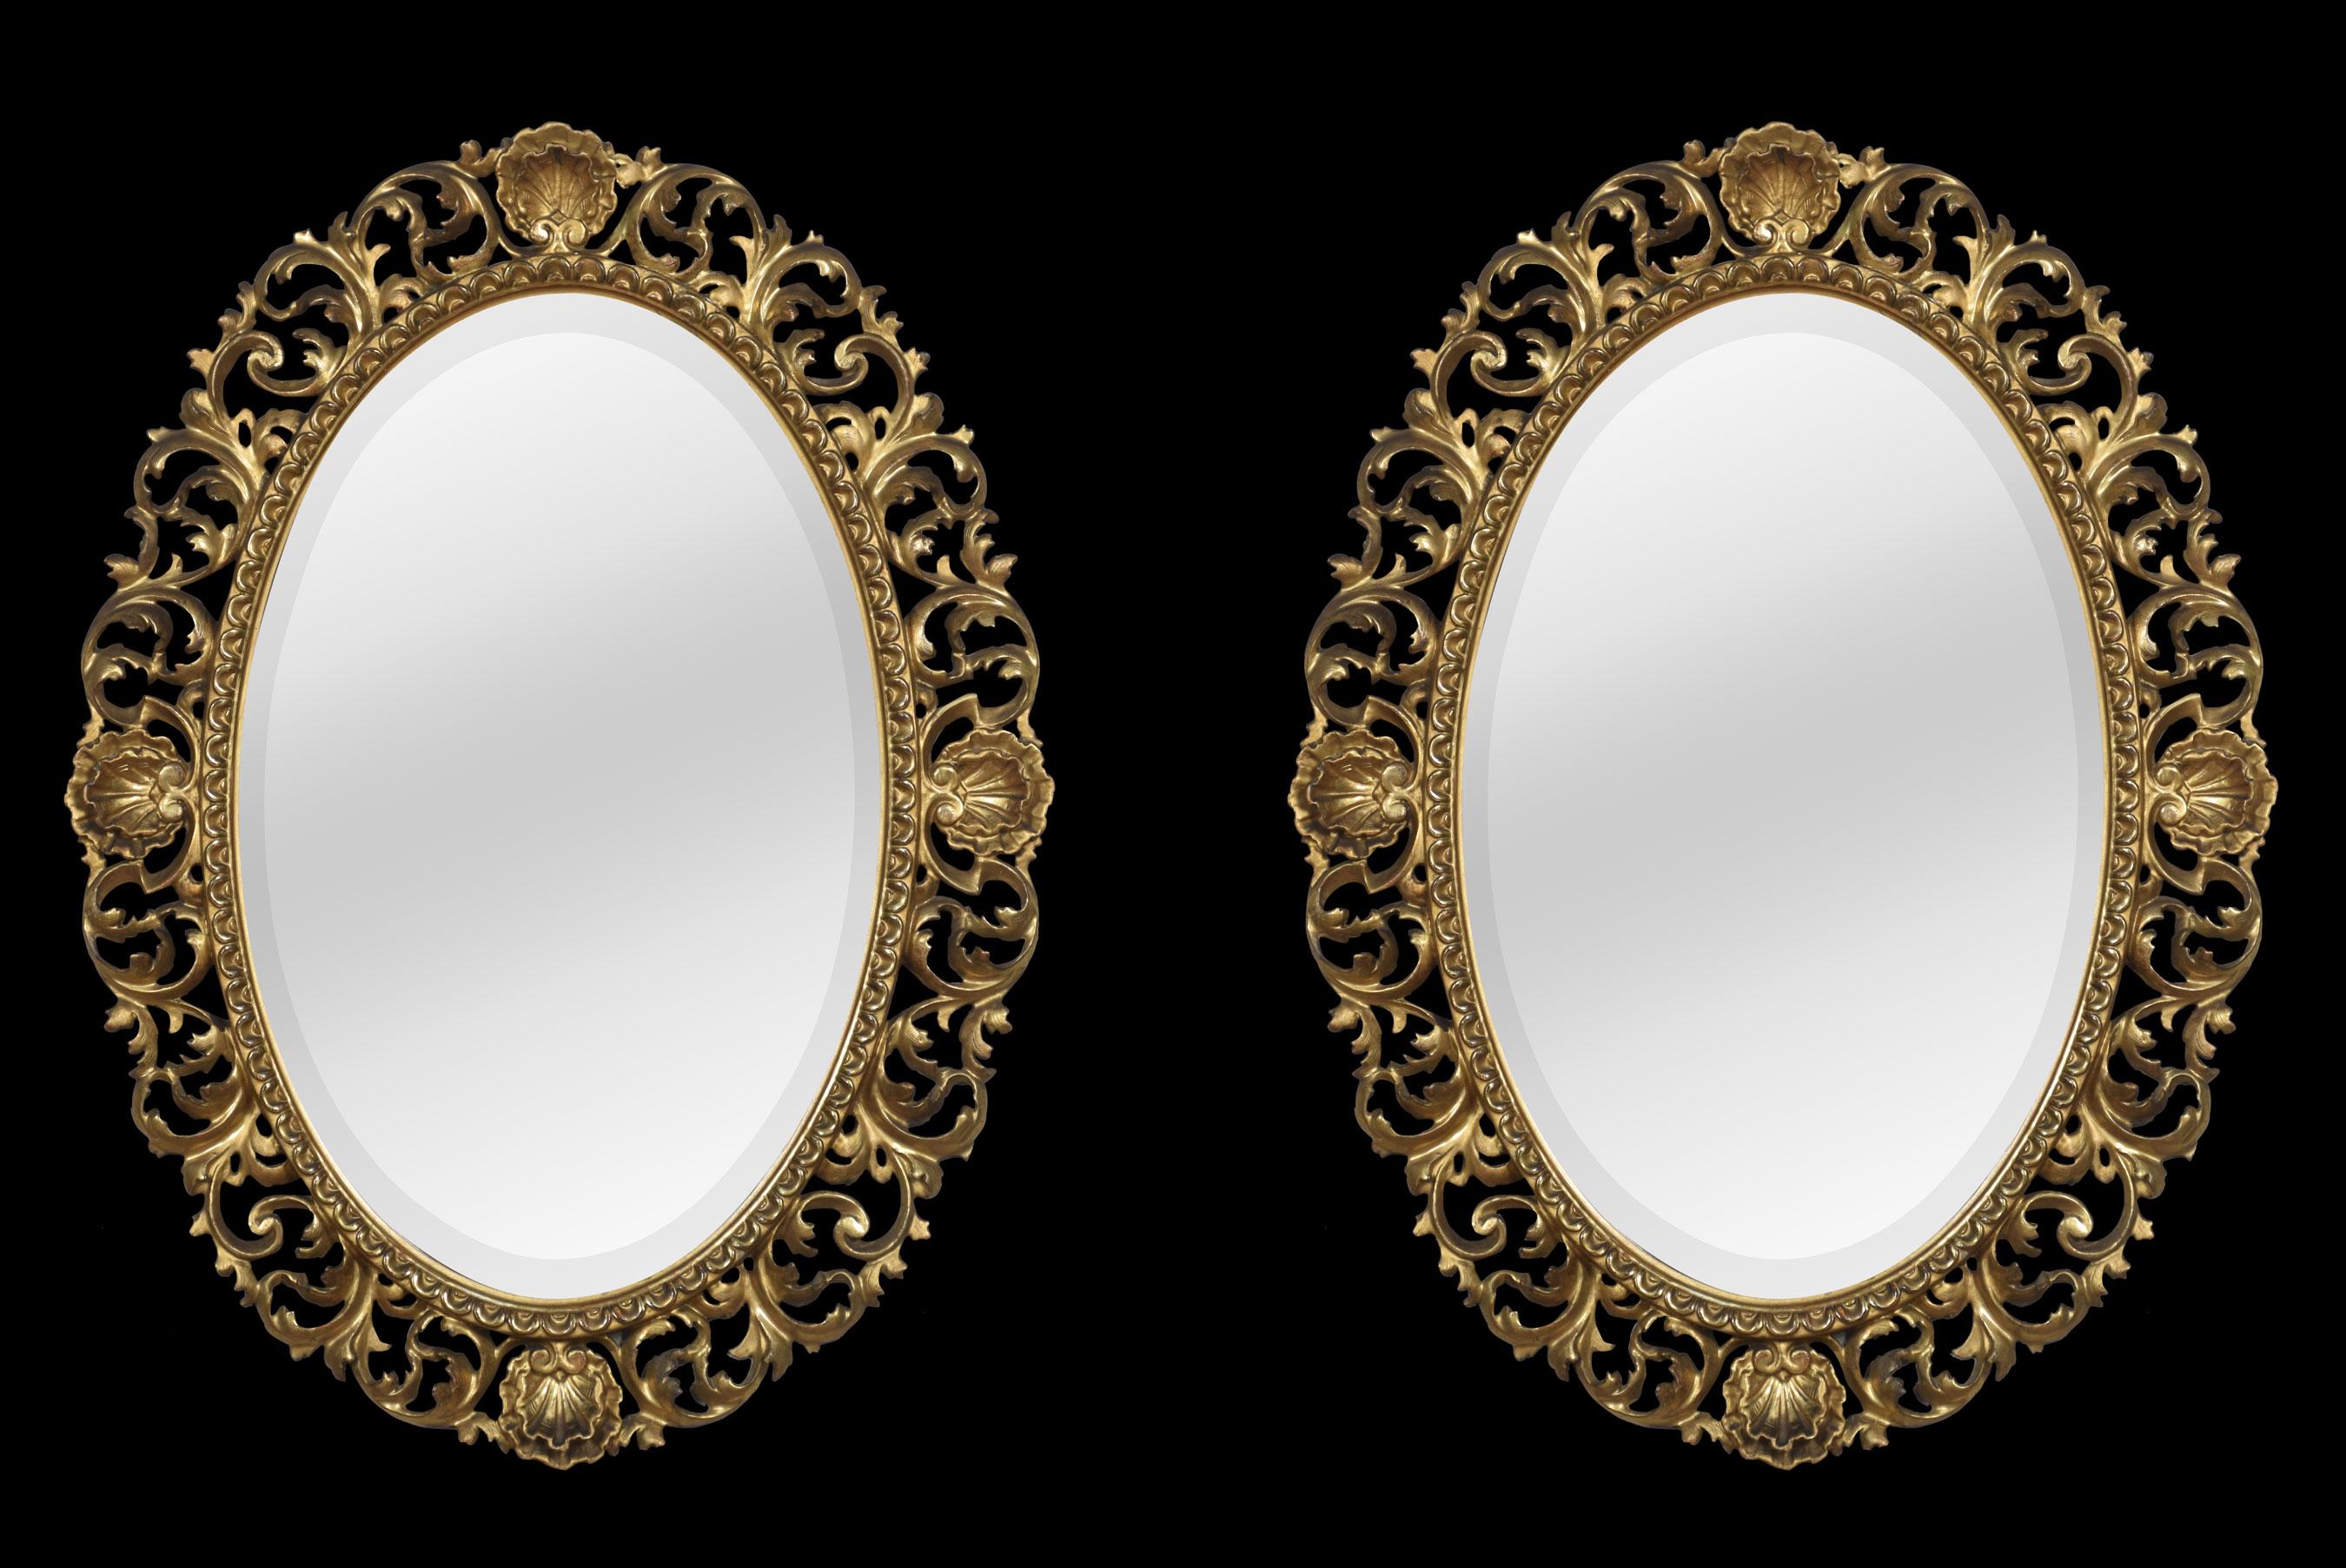 Pair of oval giltwood wall mirrors, with carved scallop and pierced scrolling acanthus border. Surrounding the original bevelled mirror plate.
Dimensions
Height 22 inches
Width 29.5 inches
Depth 1.5 inches.